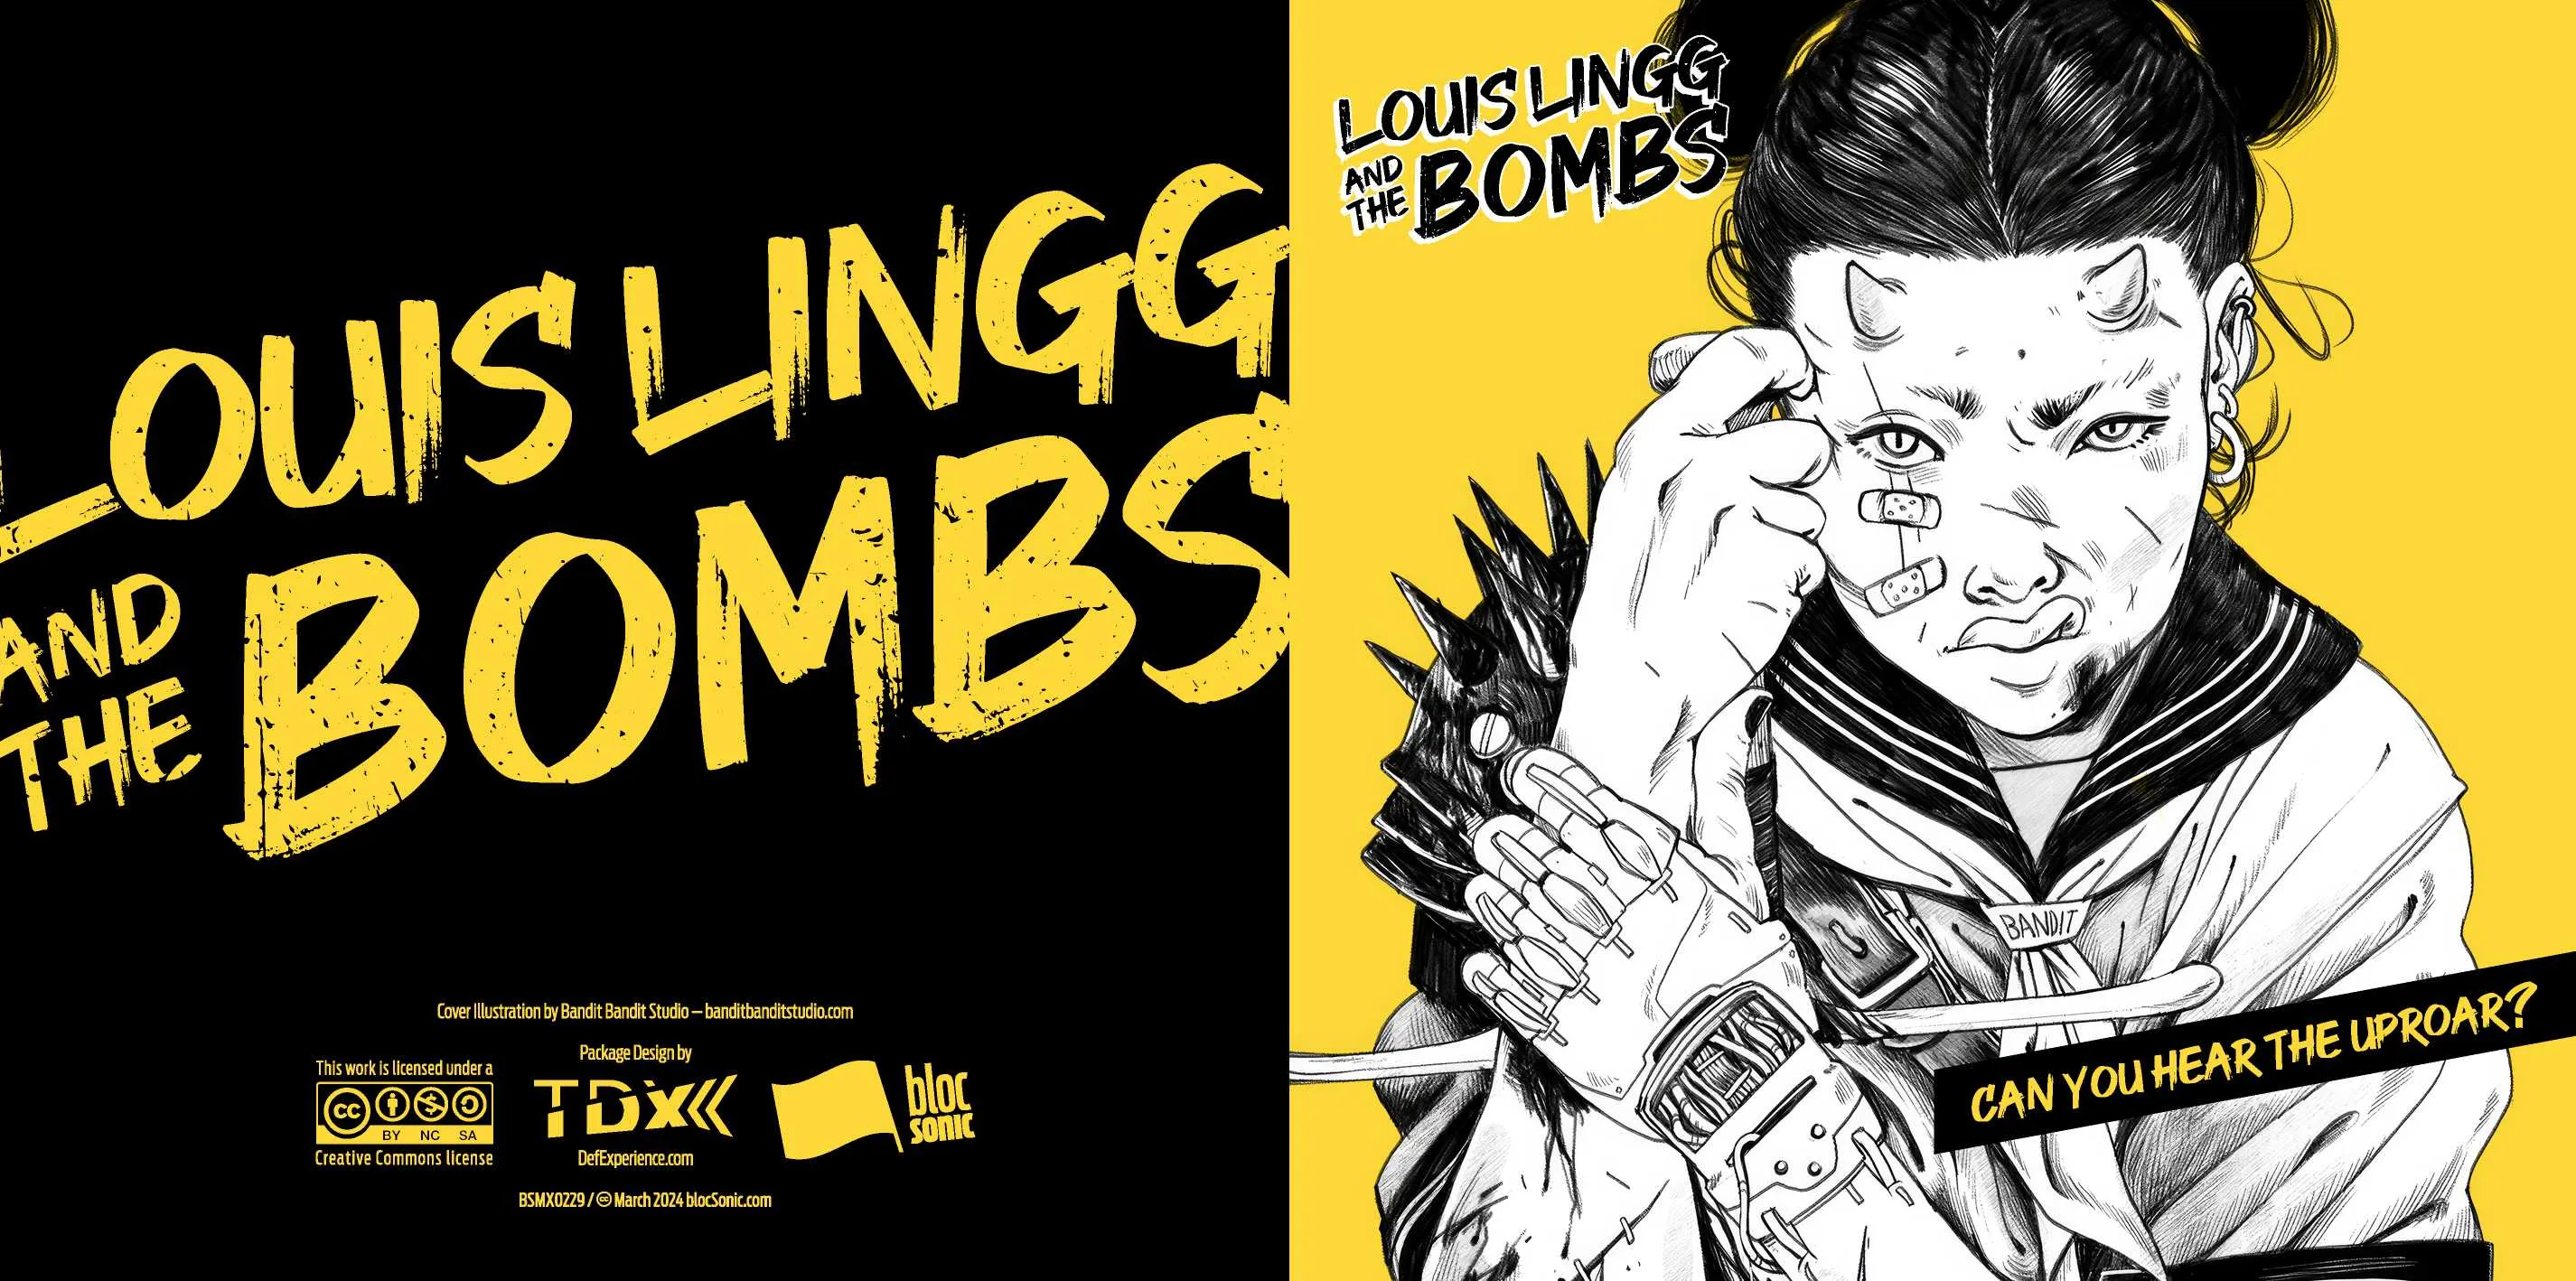 Album insert for “Can You Hear The Uproar?” by Louis Lingg and The Bombs